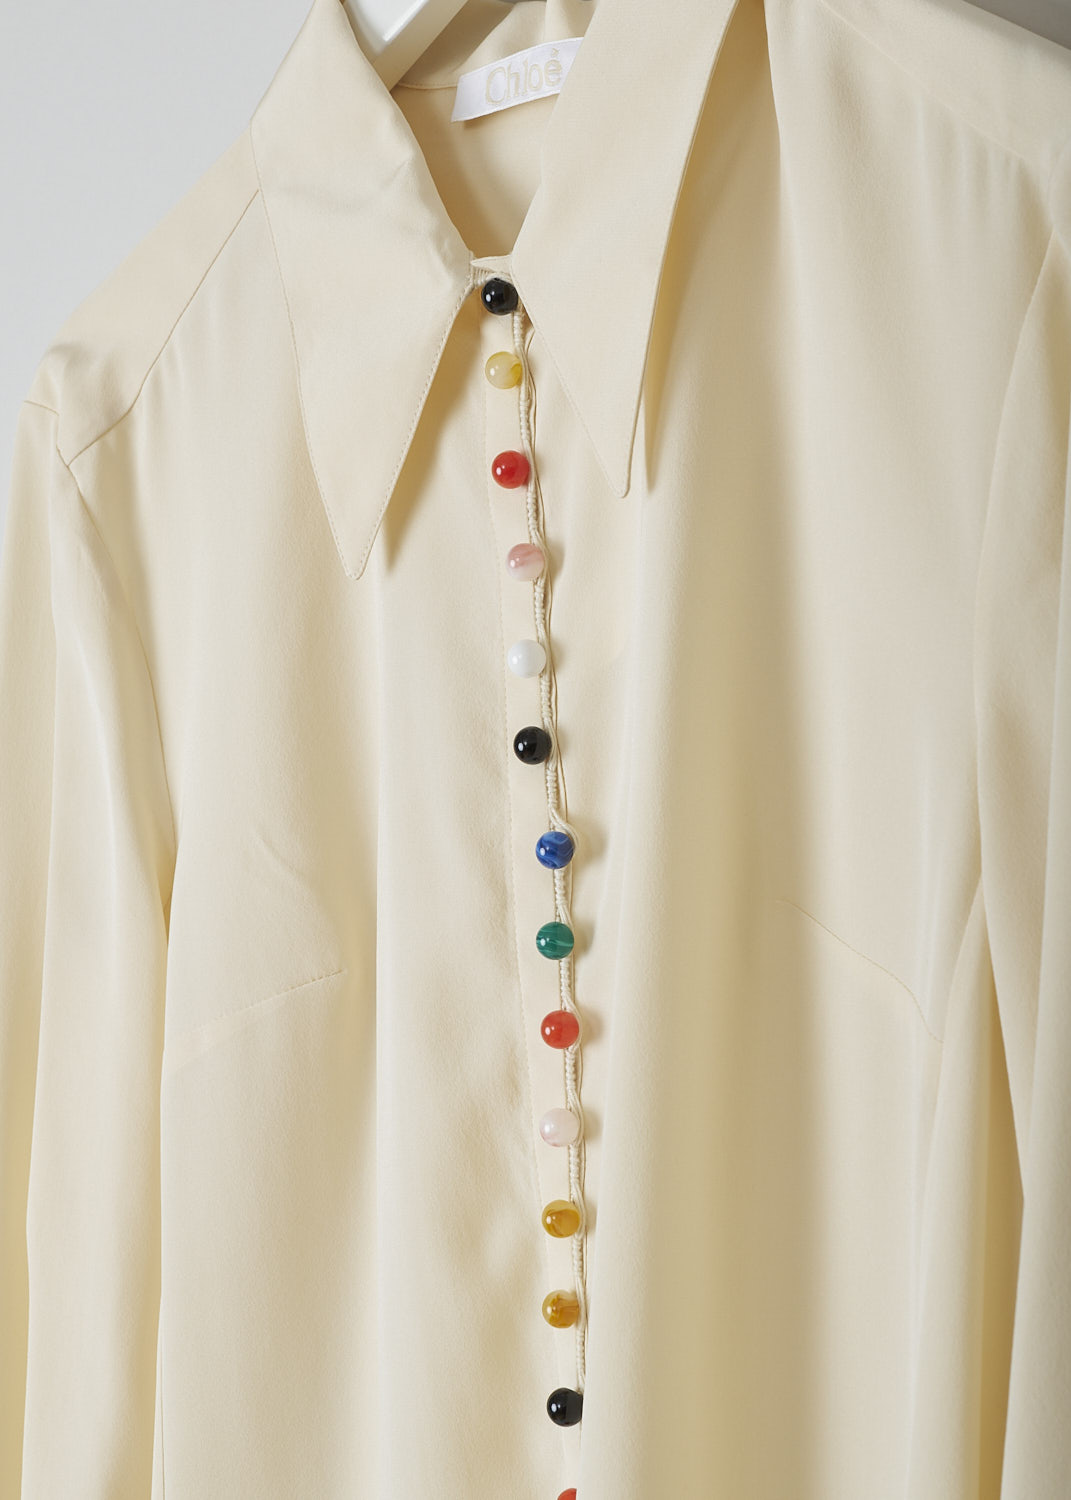 CHLOÉ, BEIGE BLOUSE WITH MULTICOLORED BEAD BUTTONS, CHC22SHT2900524T_SEED_PEARL_BEIGE, Beige, Detail, This light beige blouse features a pointed collar and has a front button closure with resin-based bead buttons in various colors. Those same bead buttons can be found on the cuffs. The blouse has a straight hem with a centre slit in the front. 
